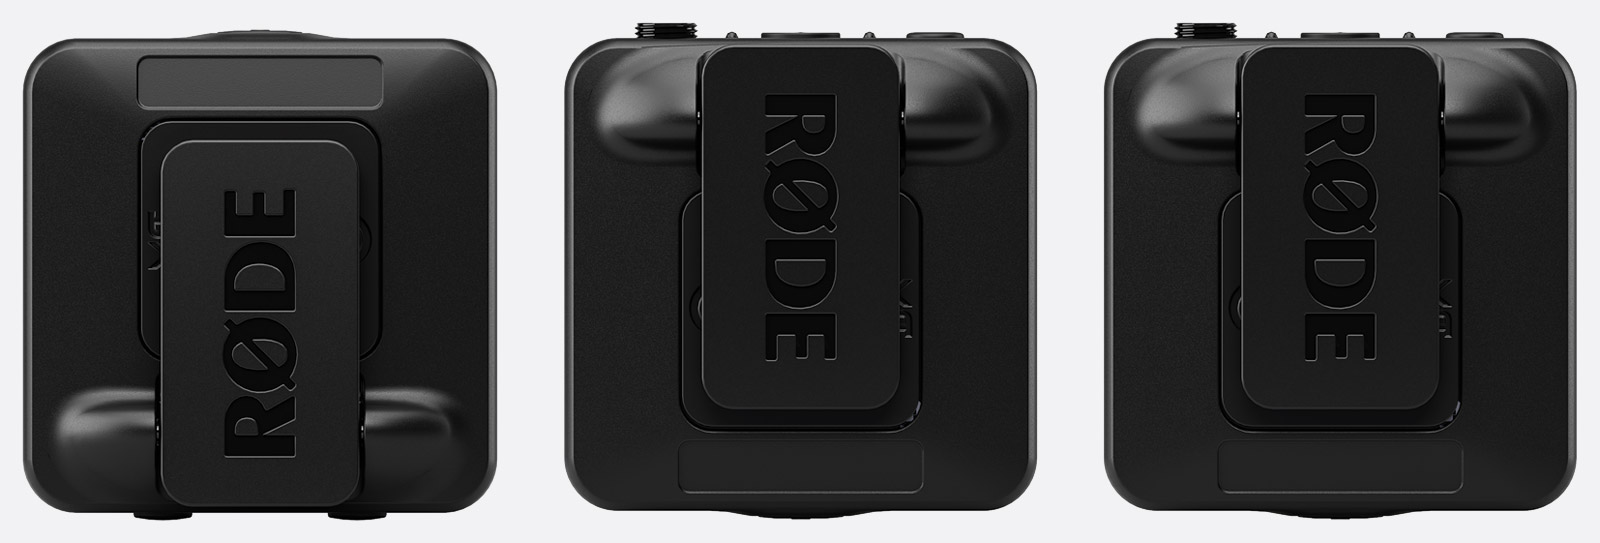 Rode Wireless PRO Microphone - Dual Transmitter Set with Lavaliers